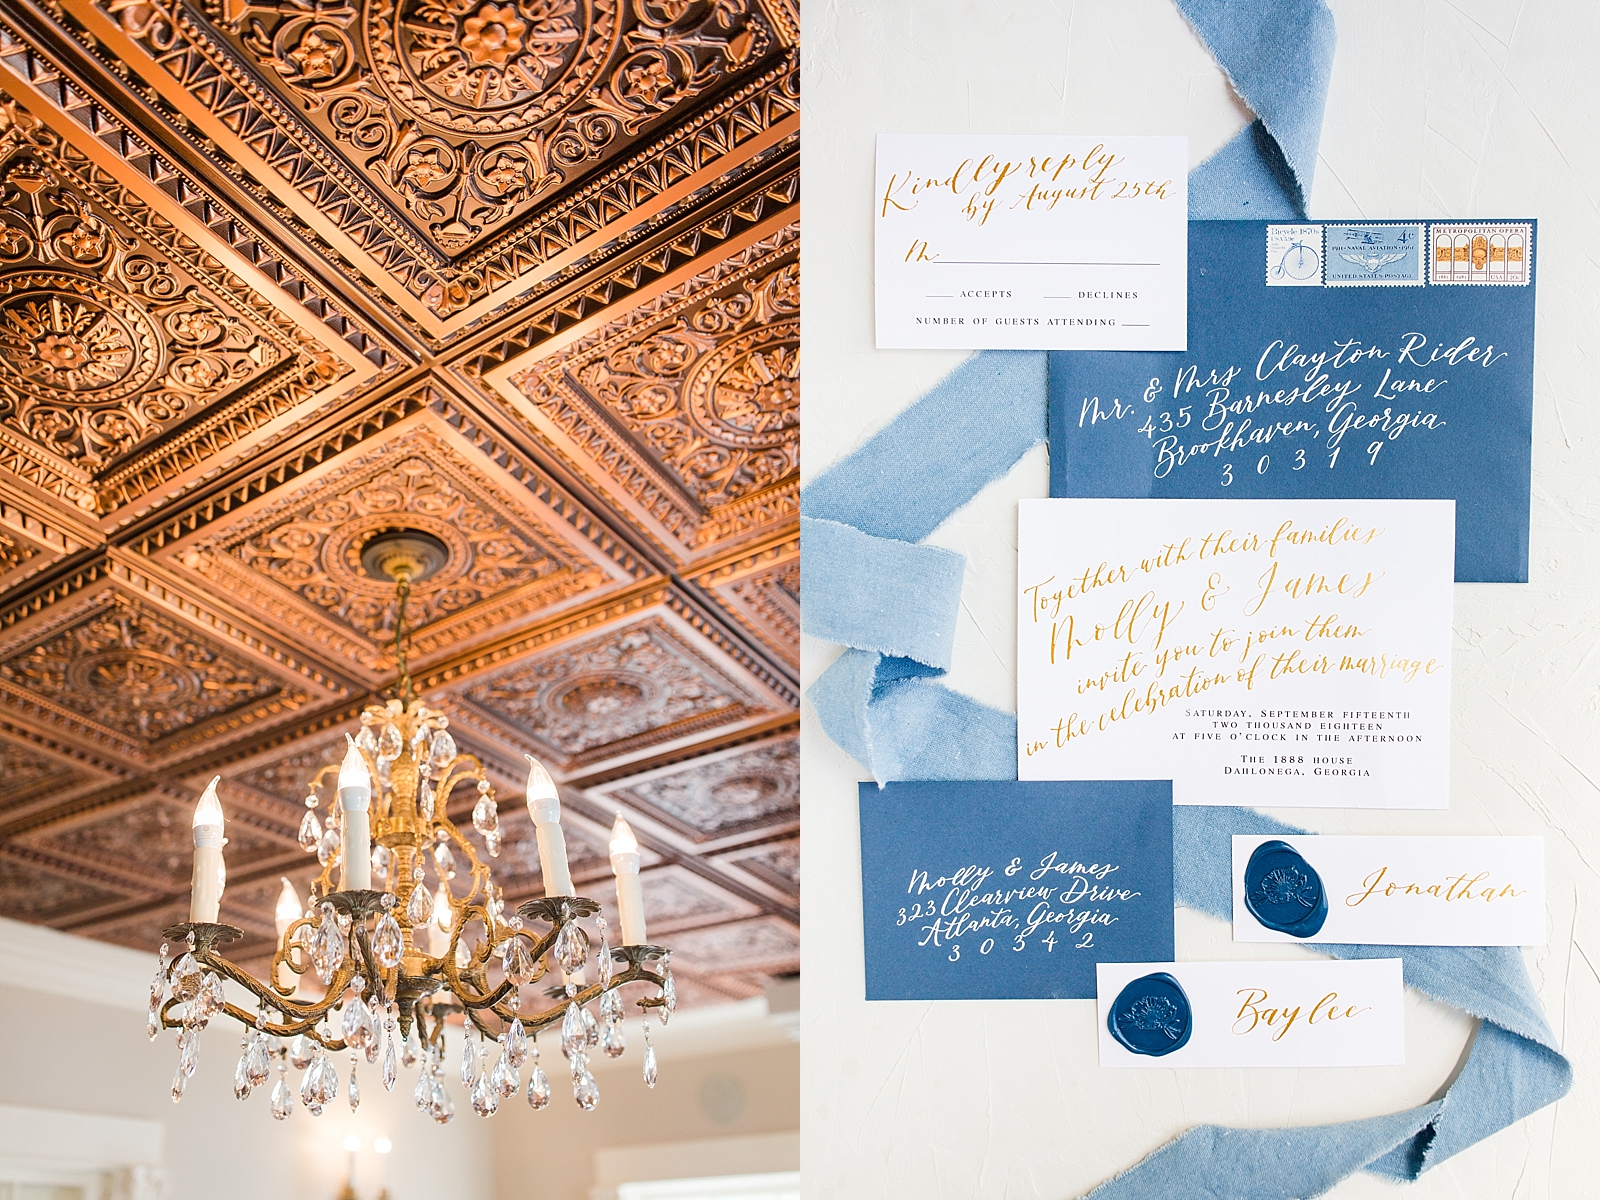 Dahlonega Wedding Venue The 1888 House ceiling with chandelier and invitation suite Photos